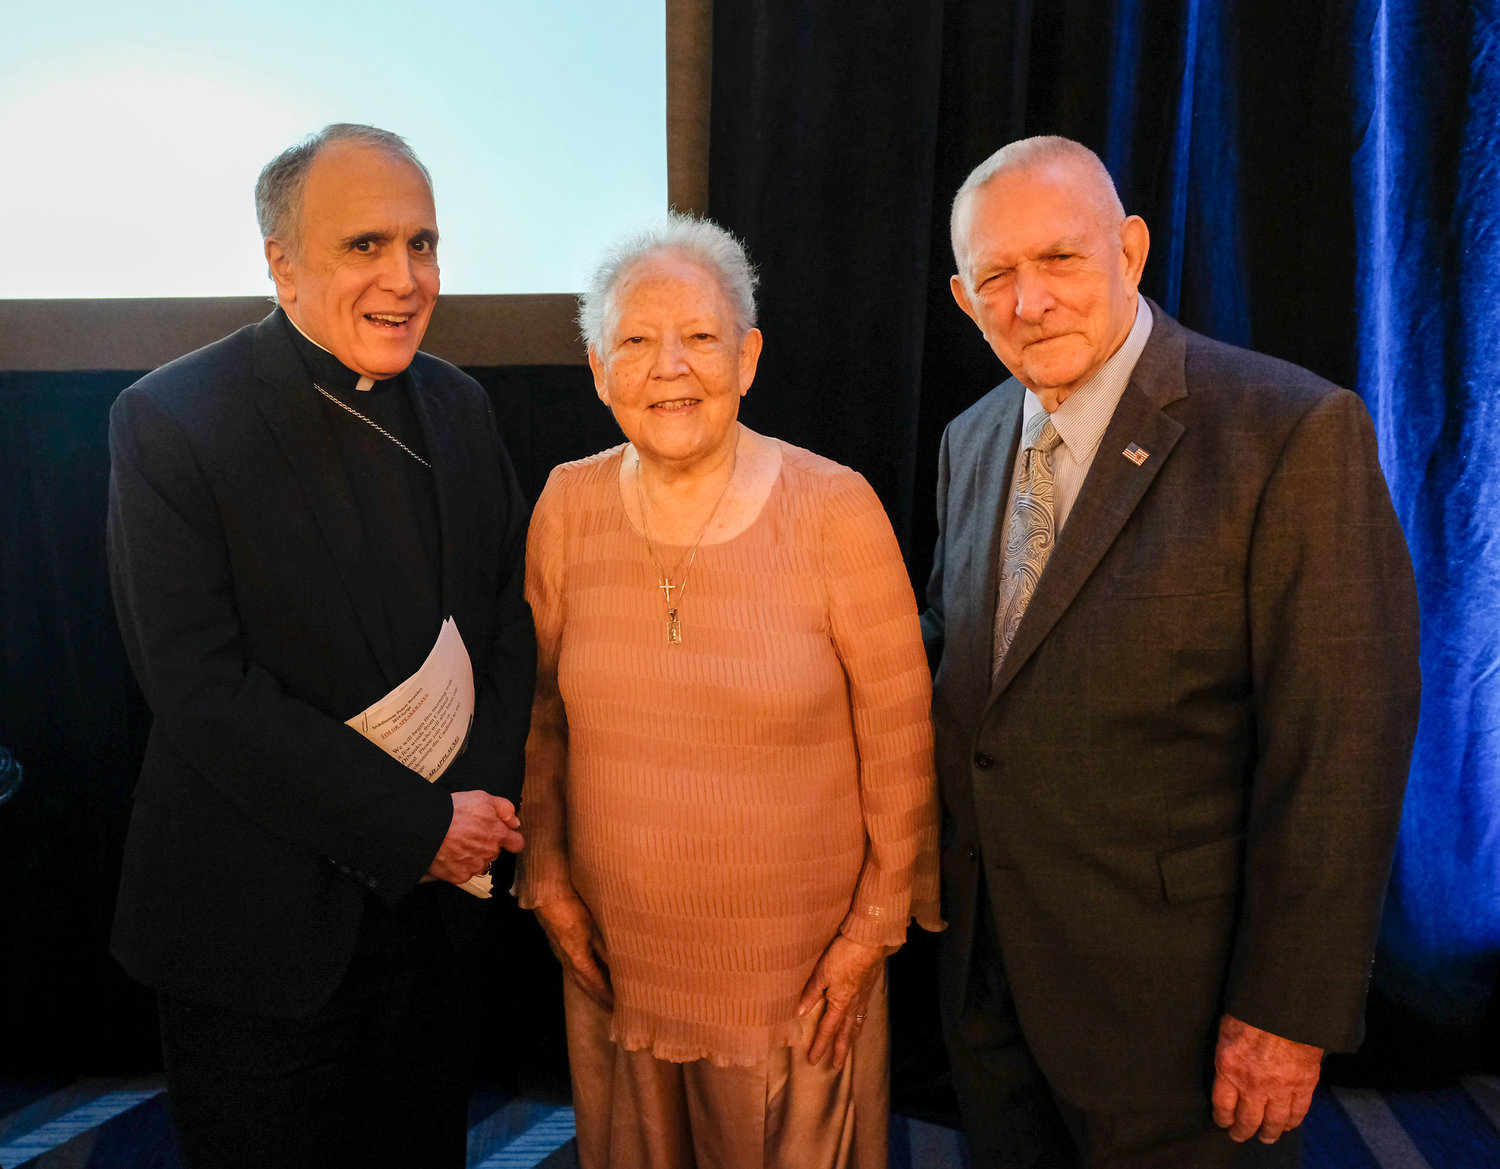 Cardinal Daniel N. DiNardo of Galveston-Houston poses with Gene Kranz, right, former flight director for Apollo 11, and his wife, Marta, during the 2019 Archdiocese of Galveston-Houston Prayer Breakfast in Houston July 30. Gene Kranz, who served as the event’s speaker, is a parishioner at Shrine of the True Cross Catholic Church in Dickinson, Texas, near Houston.